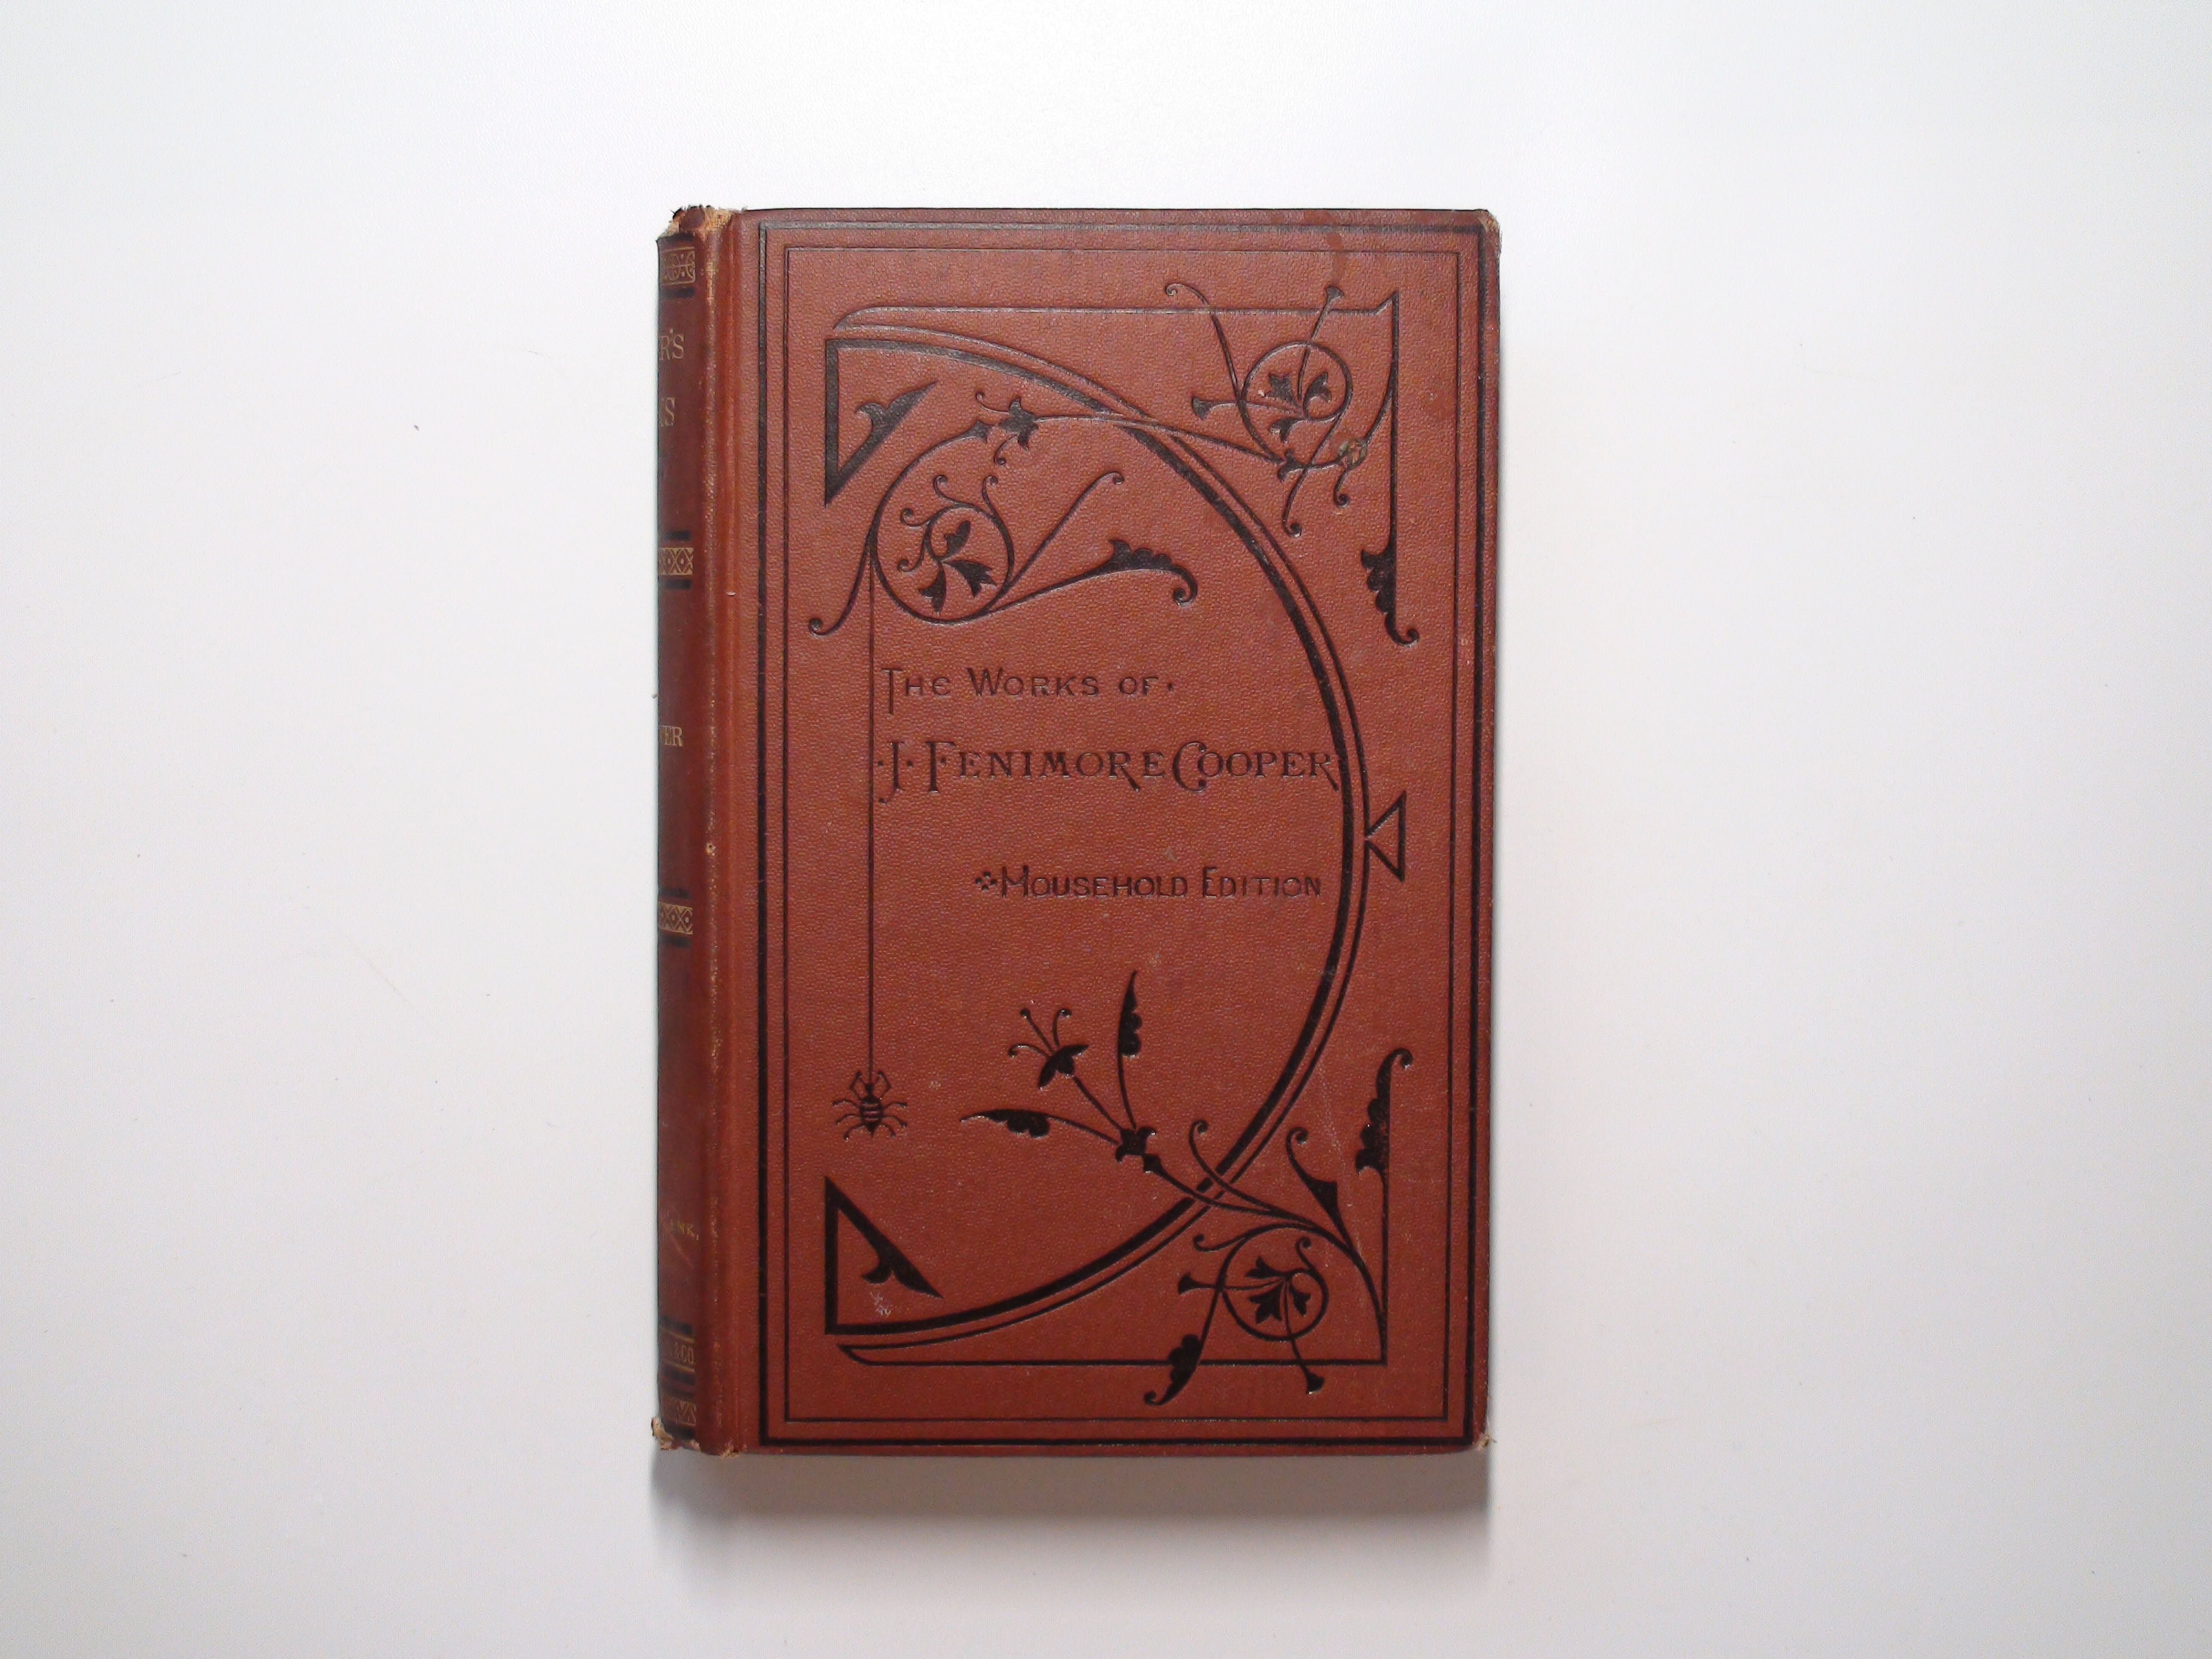 The Red Rover, A Tale, by J. Fenimore Cooper, Naval Interest Novel, c1890s